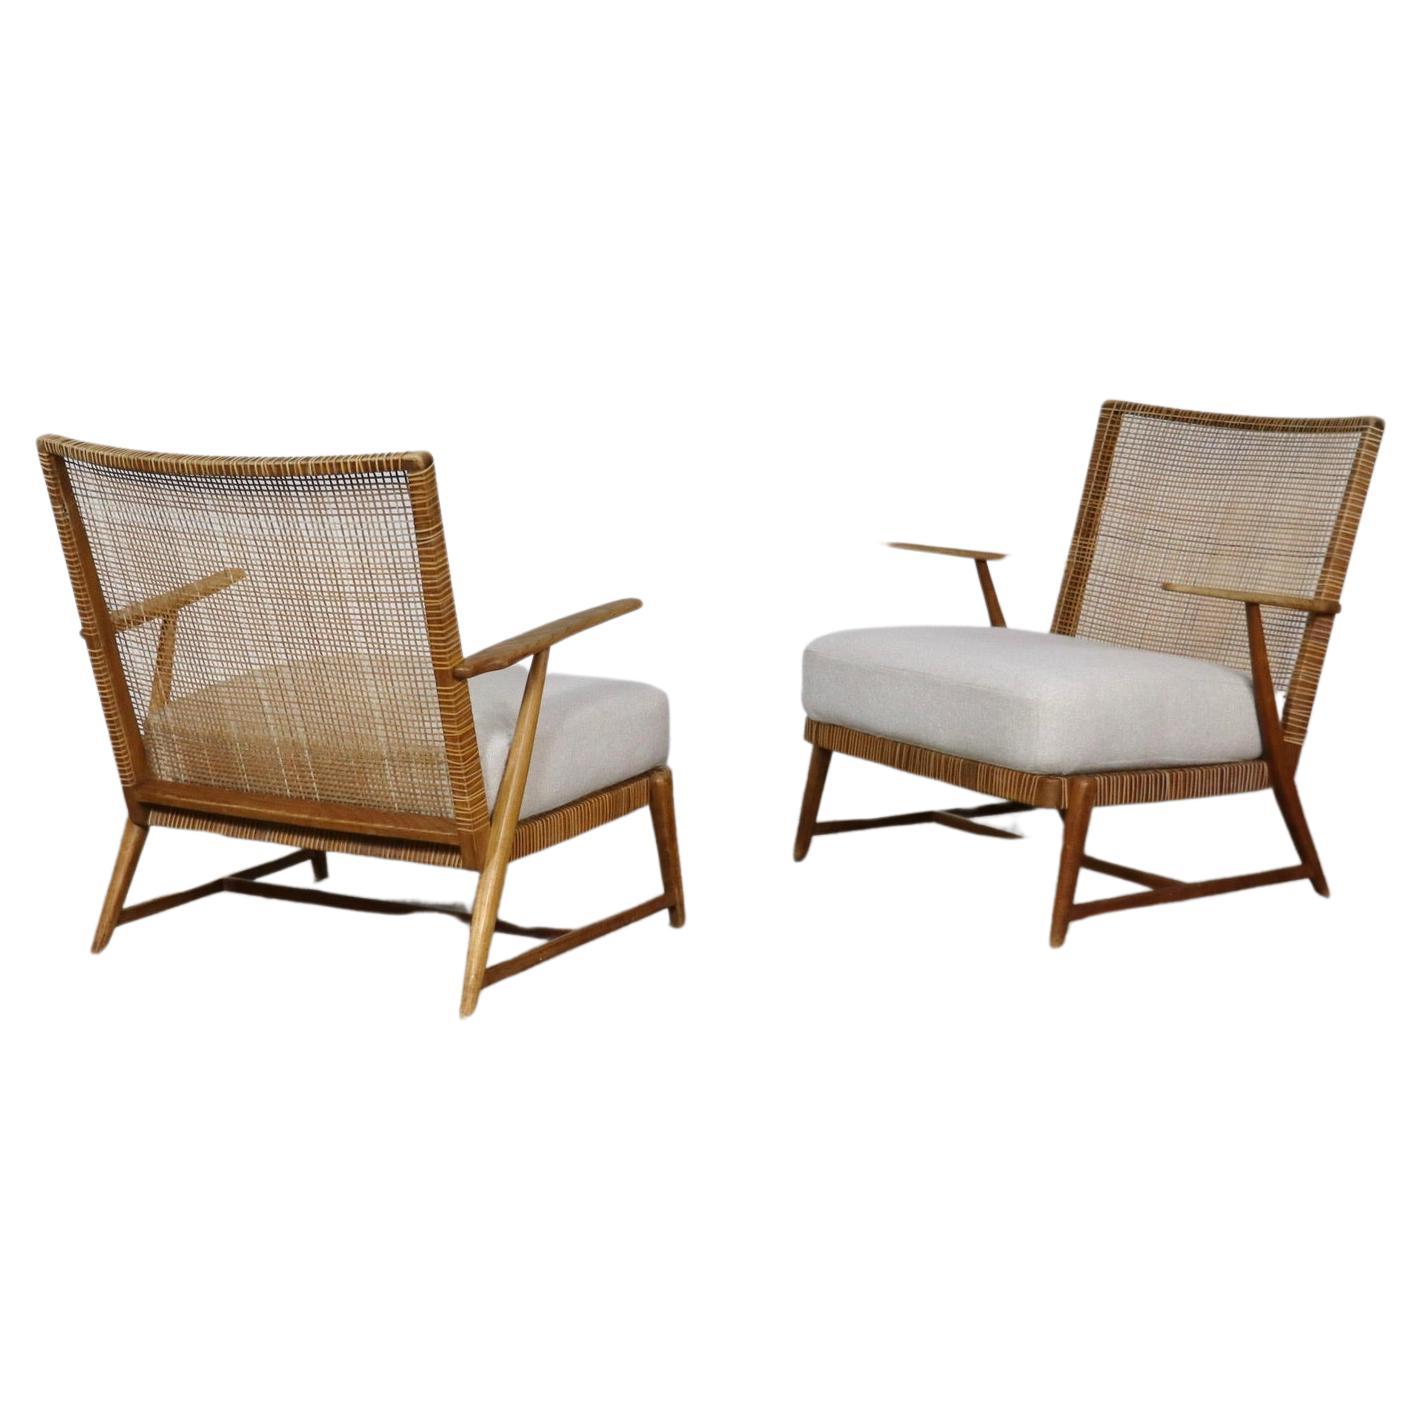 Pair of Midcentury lounge chairs in oak and cane, Germany, 1950s